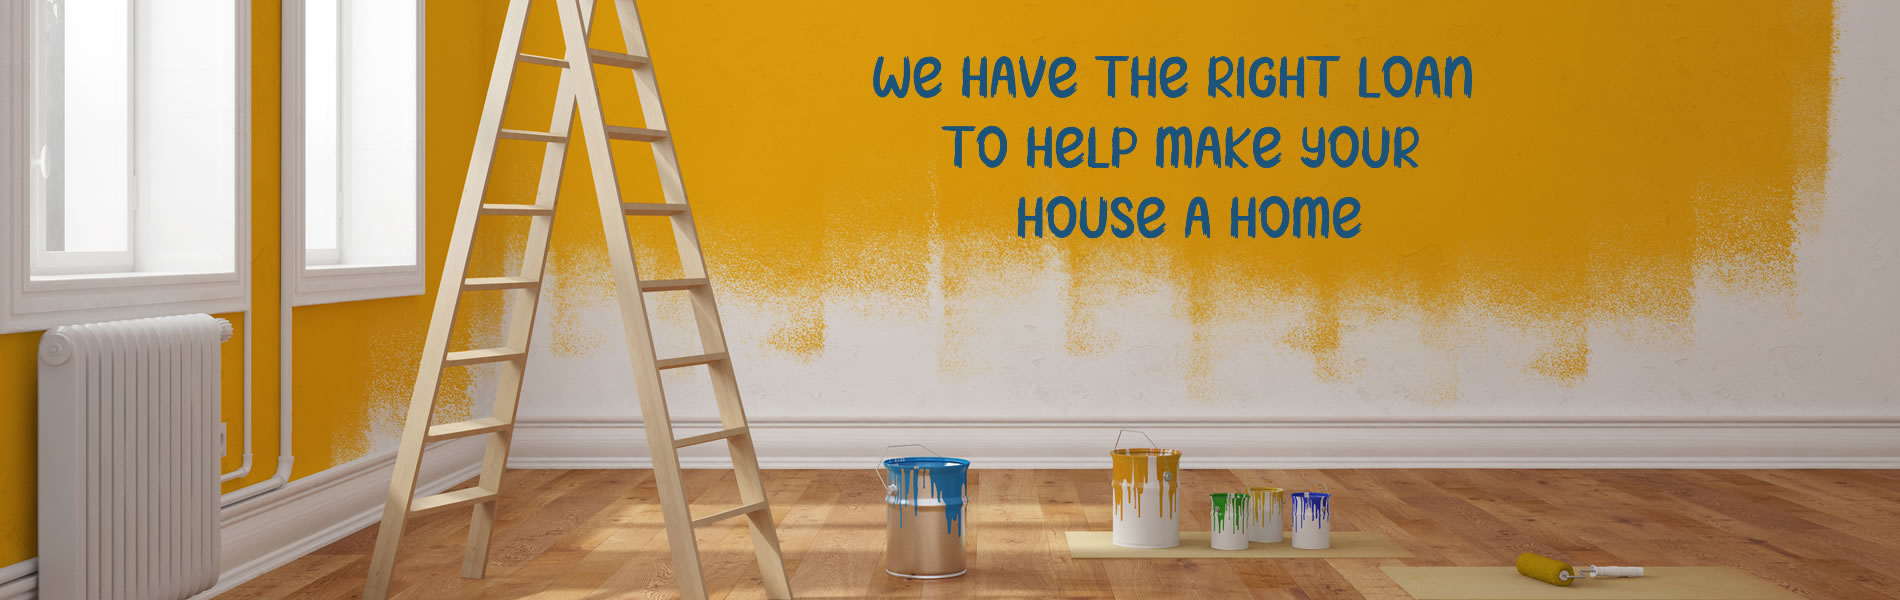 We have the right loan to help make your house a home